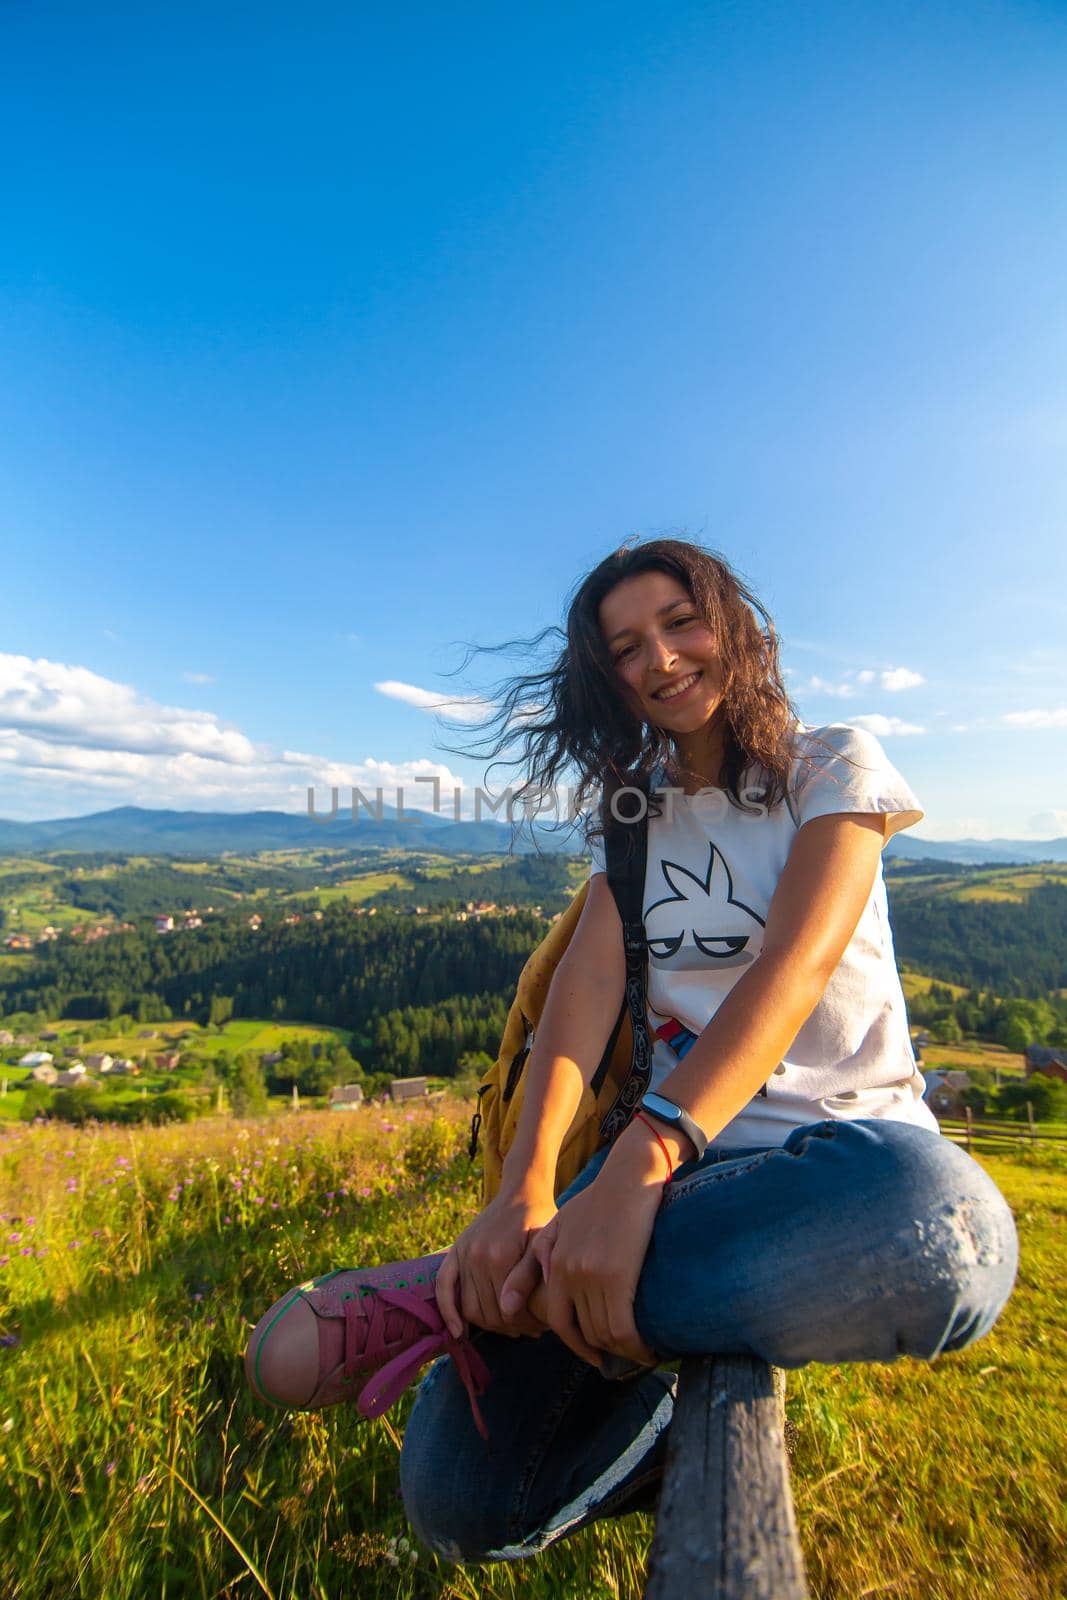 Happy gorgeous girl enjoy hills view sitting in flower field on the hill with breathtaking nature landscape.